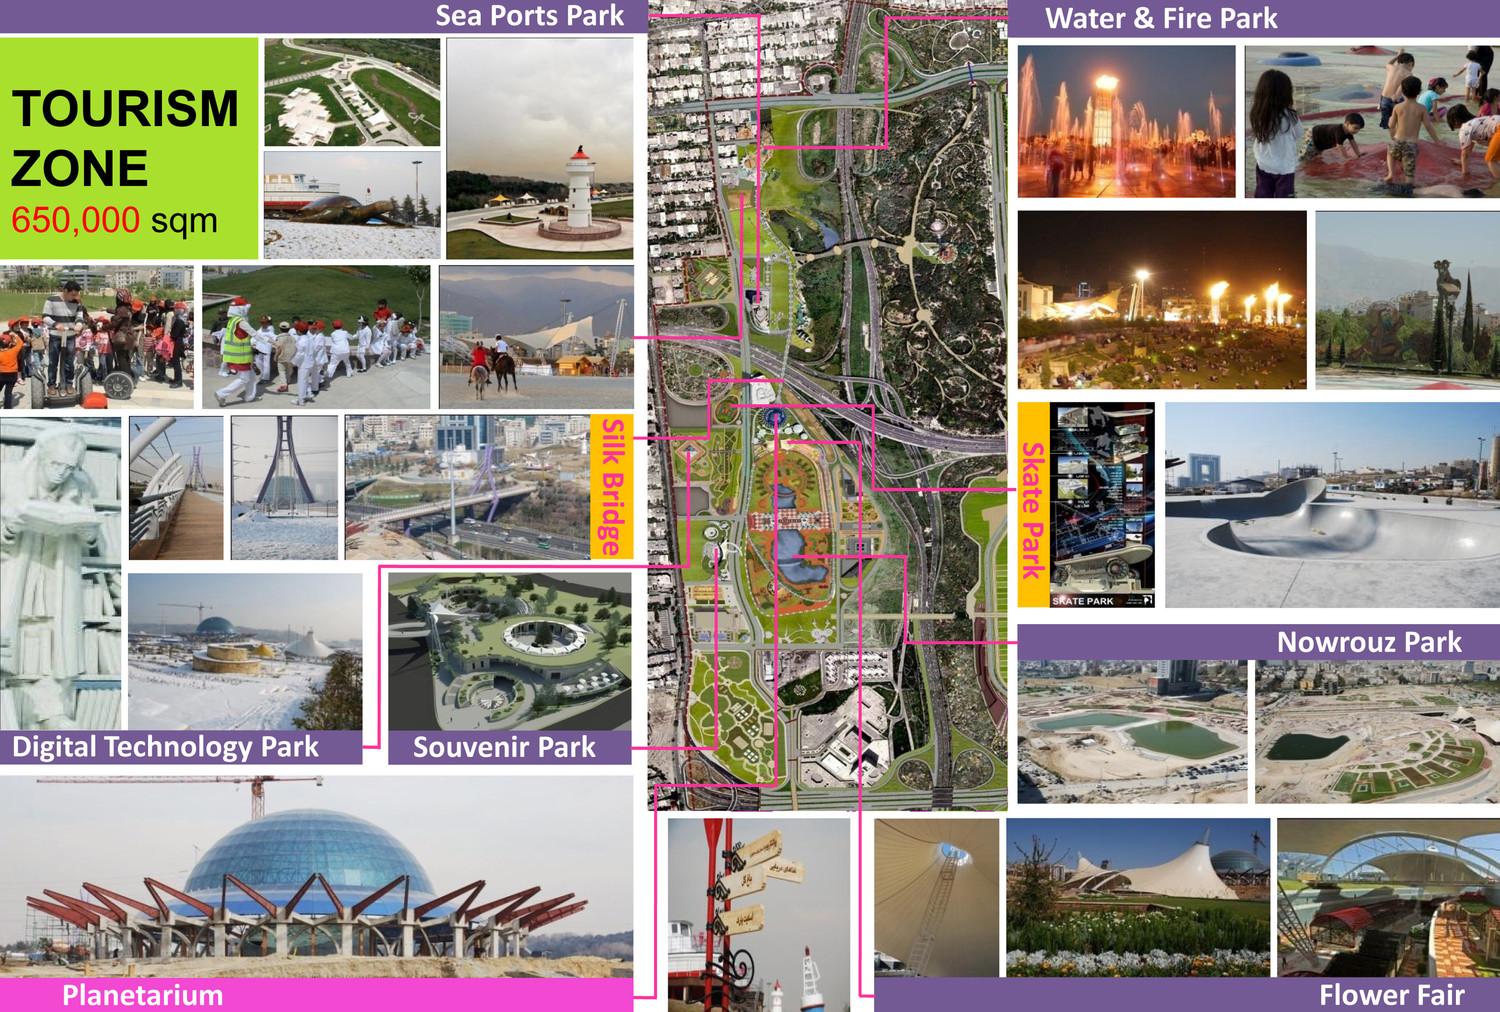 Plan of tourism zone and related pictures